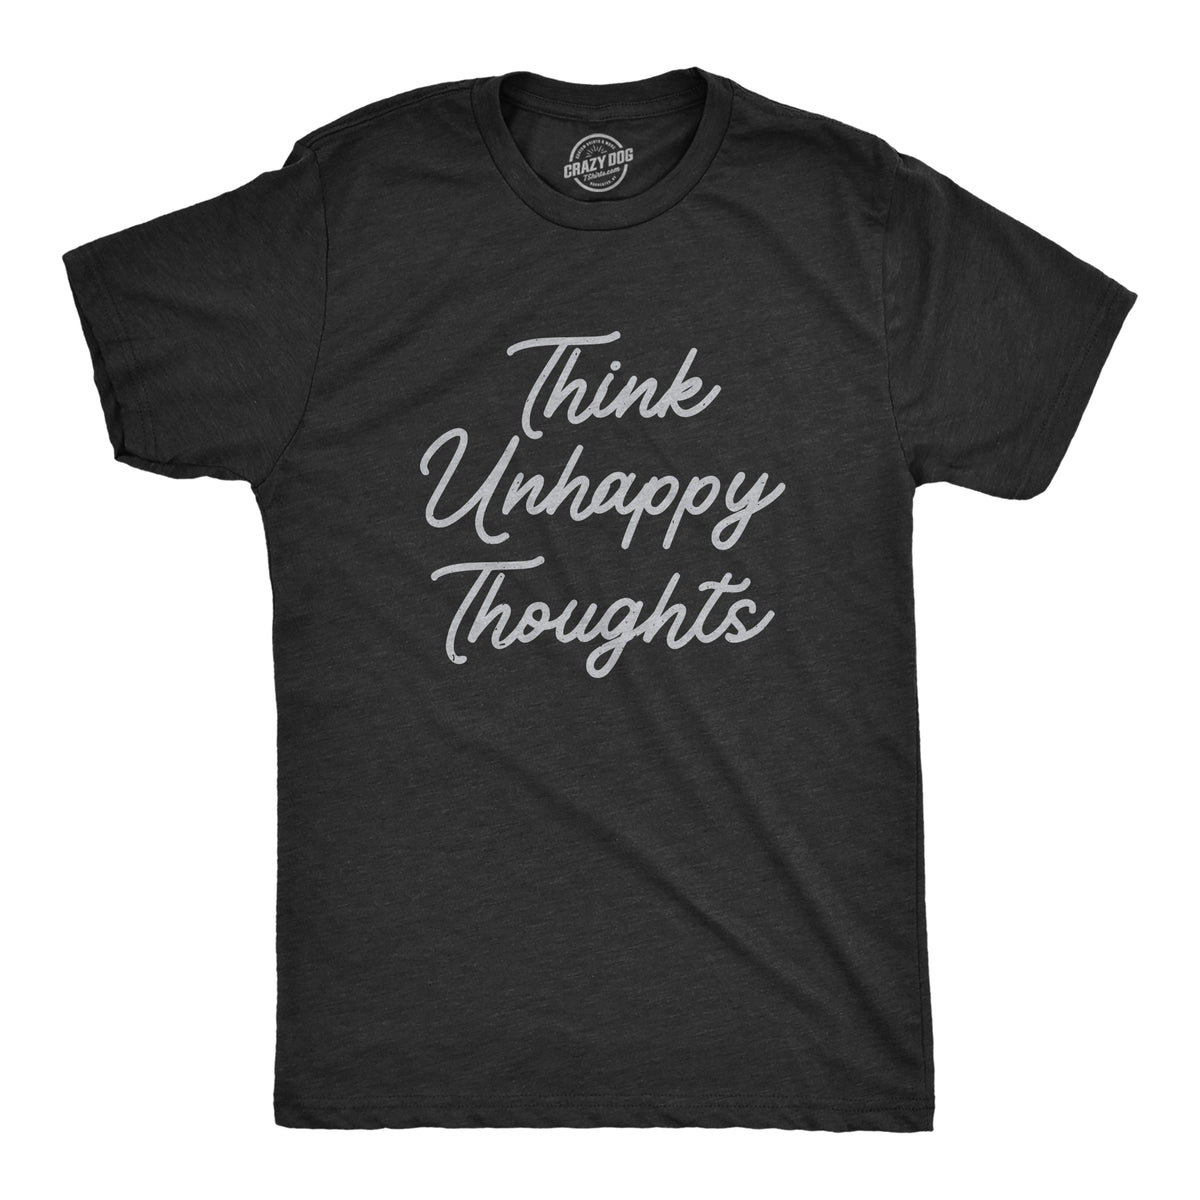 Funny Heather Black - UNHAPPY Think Unhappy Thoughts Mens T Shirt Nerdy Sarcastic Tee